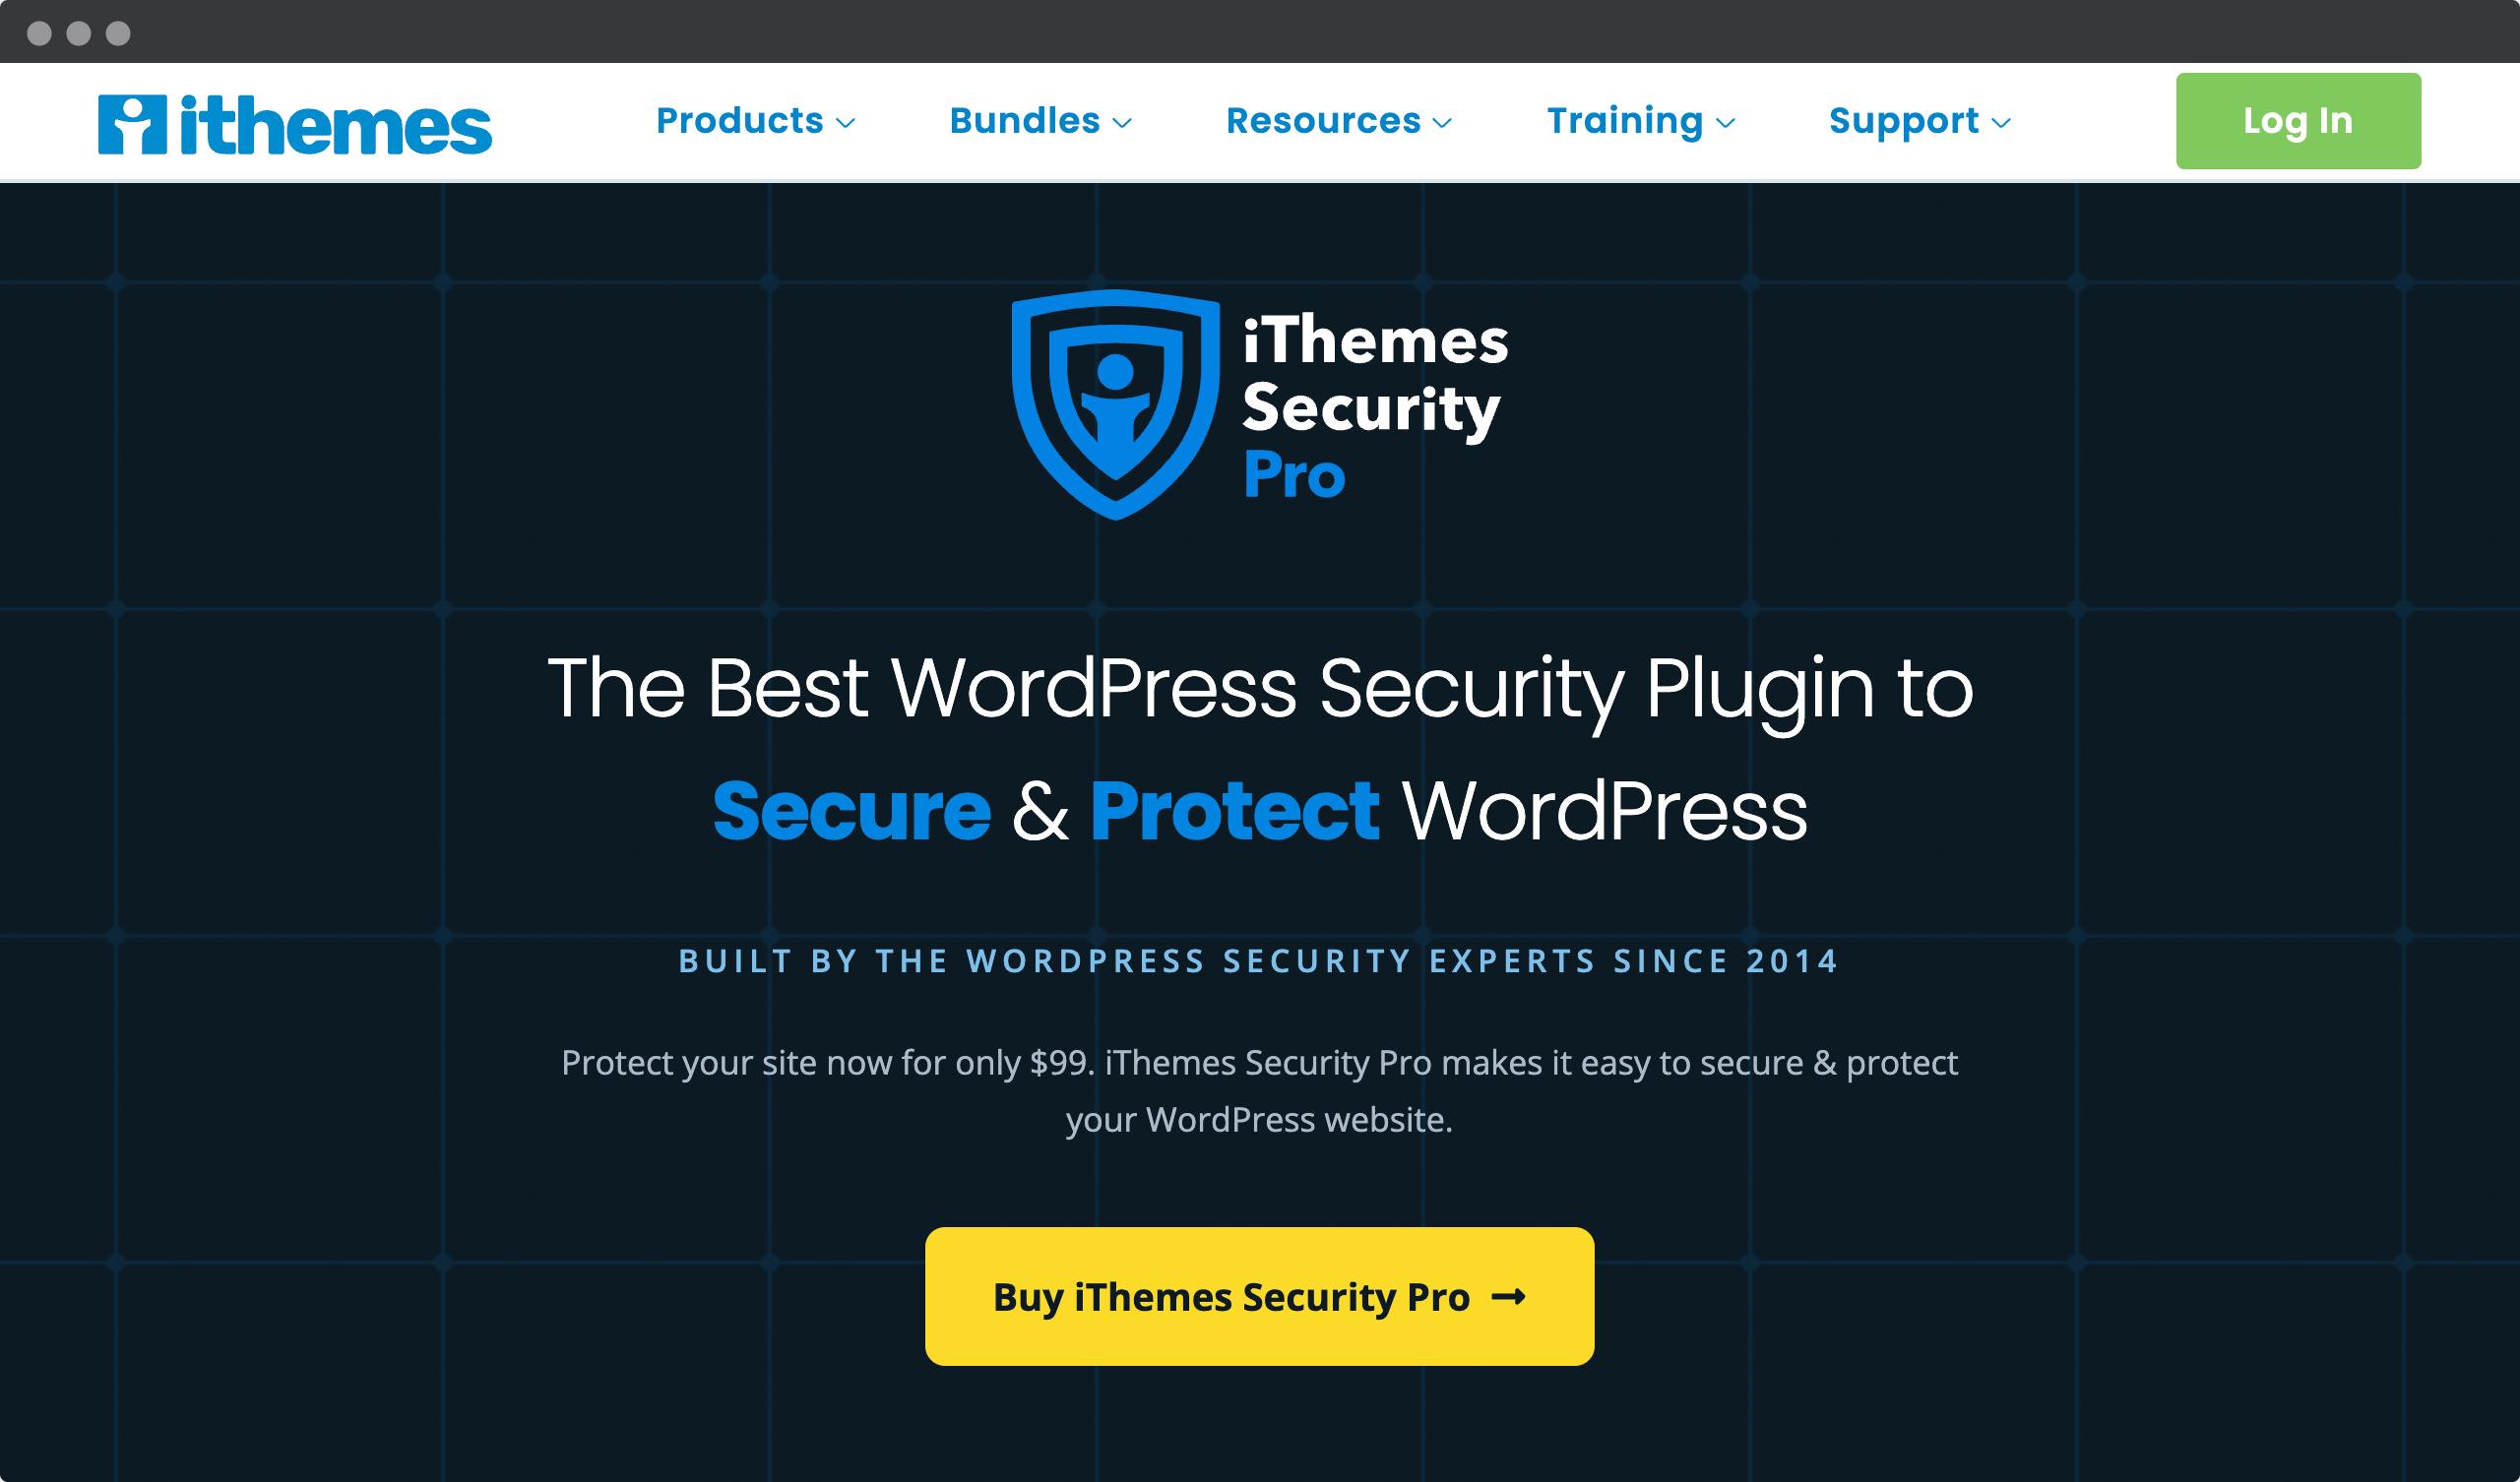 Screenshot of the iThemes Security pro website - Security plugin for WordPress